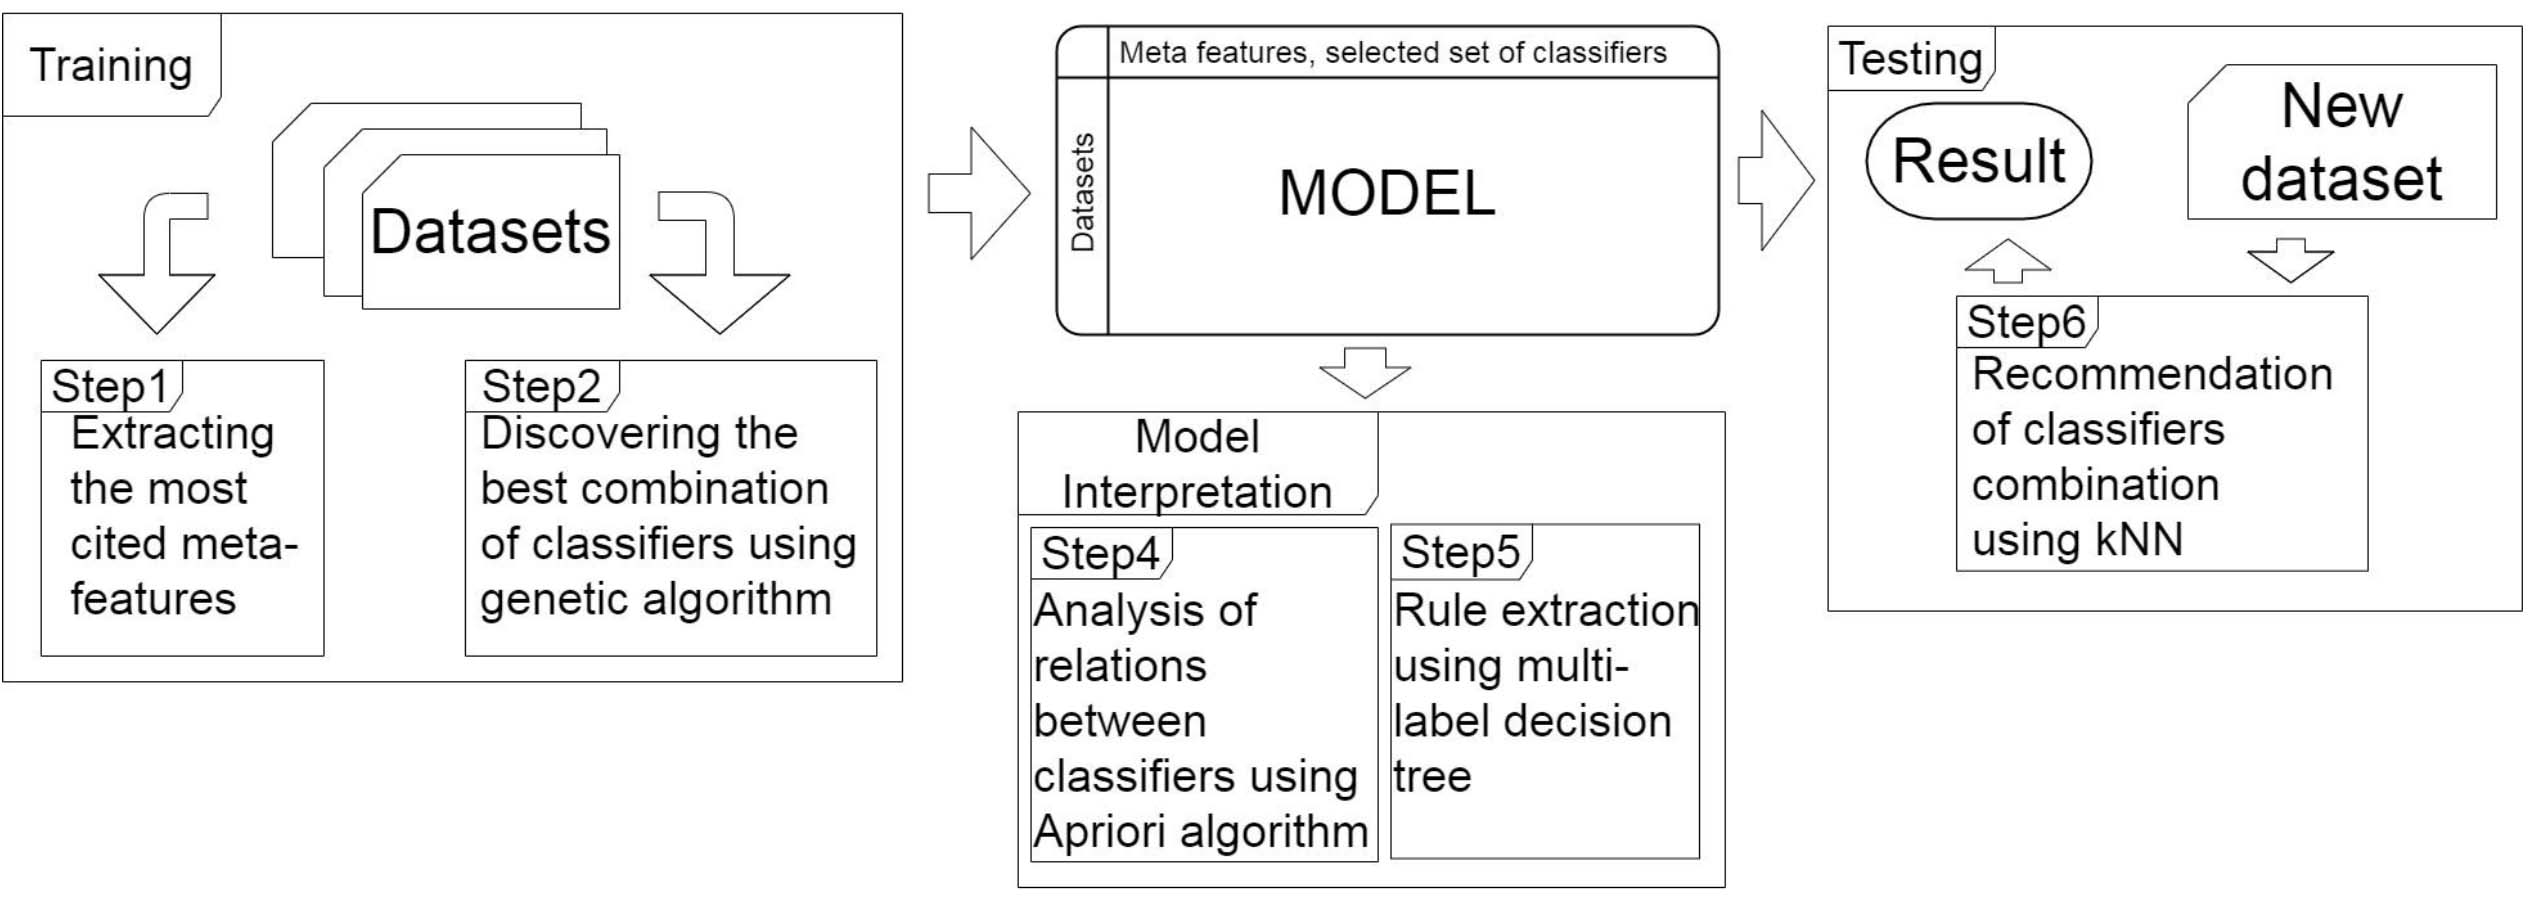 Overview of MEGA and the main steps executed by its three components. The Training component generates a model from meta-features by applying a genetic algorithm on input datasets. The Model Interpretation component interprets the generated model using a multi-label decision tree and an a priori algorithm. The Testing component recommends a combination of classifiers for an unseen dataset using kNN algorithm.